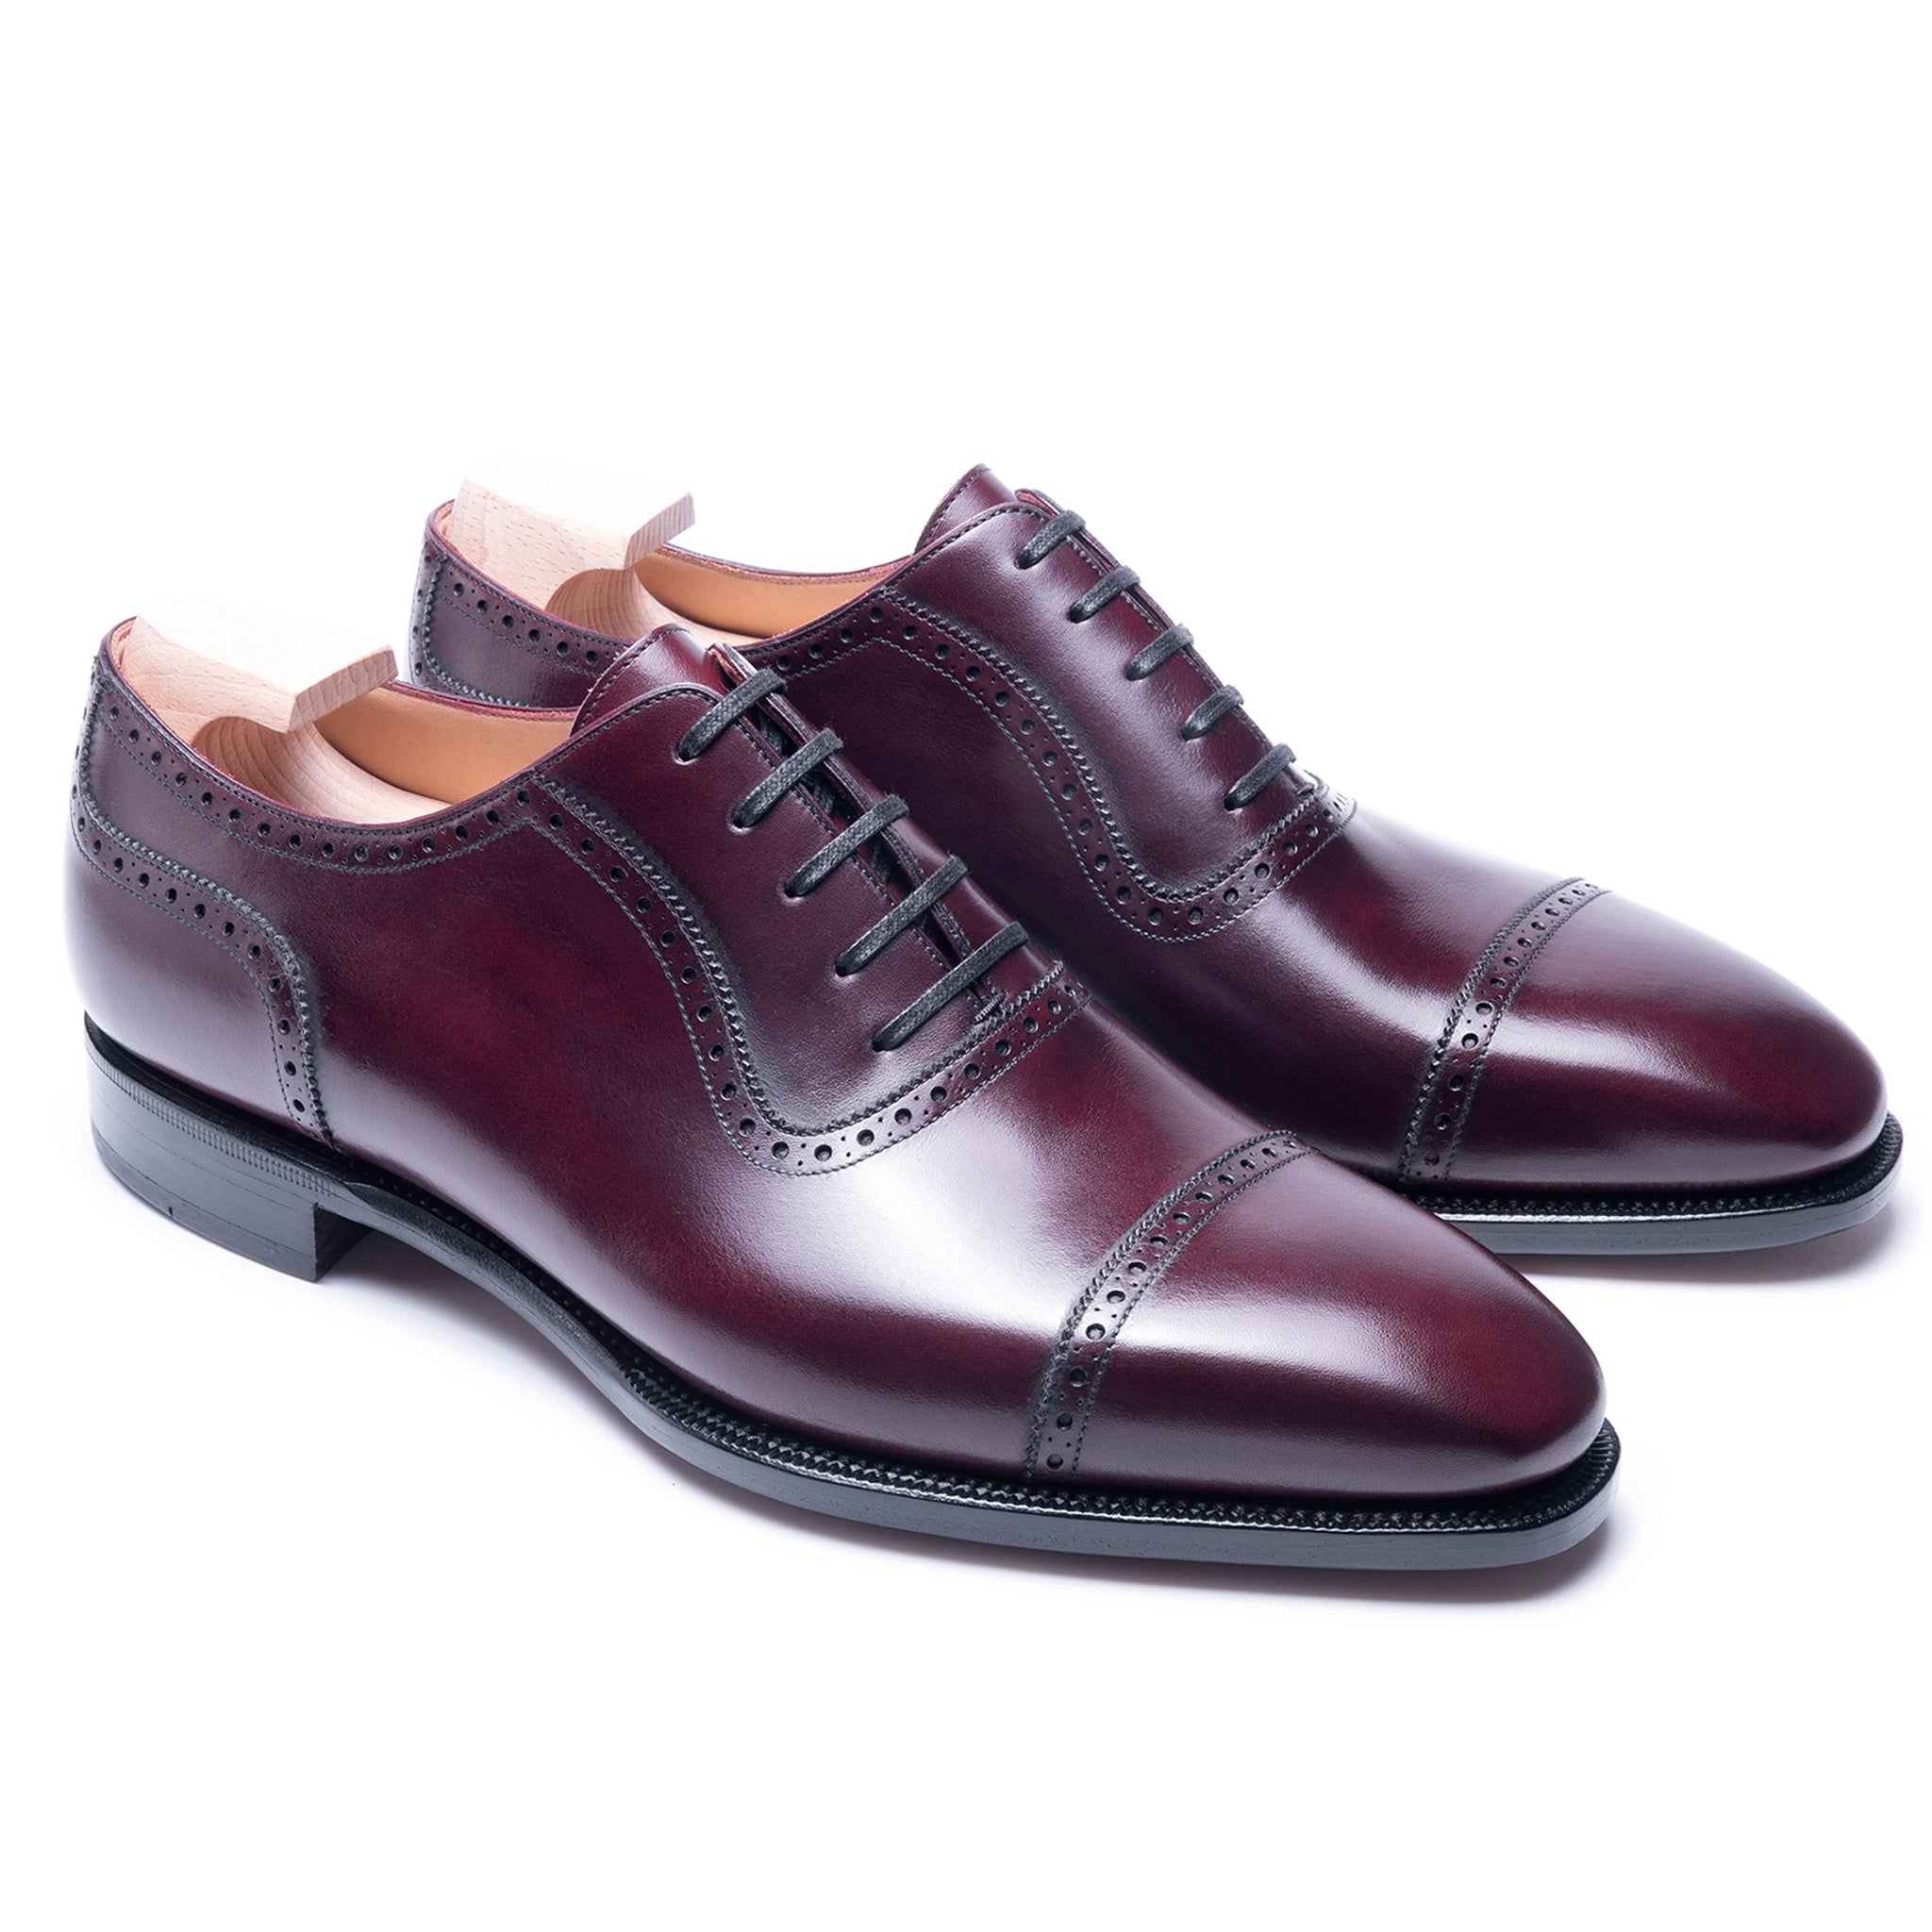 TLB Mallorca | Men's leather shoes | Oxford Shoes Artistaaceccolection ...